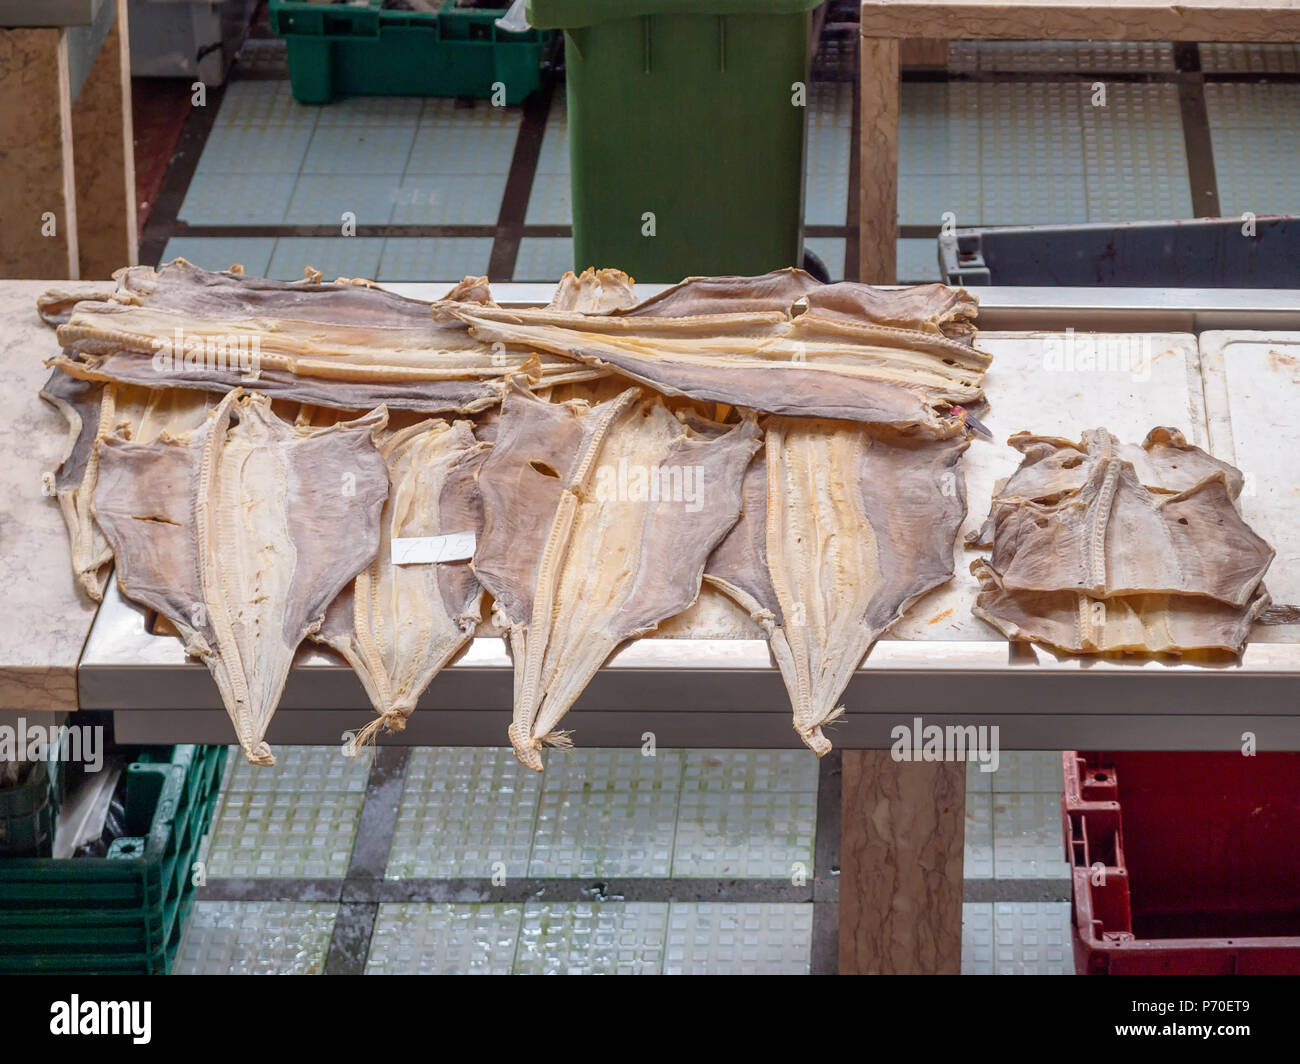 Fish market in Funchal, Madeira Stock Photo